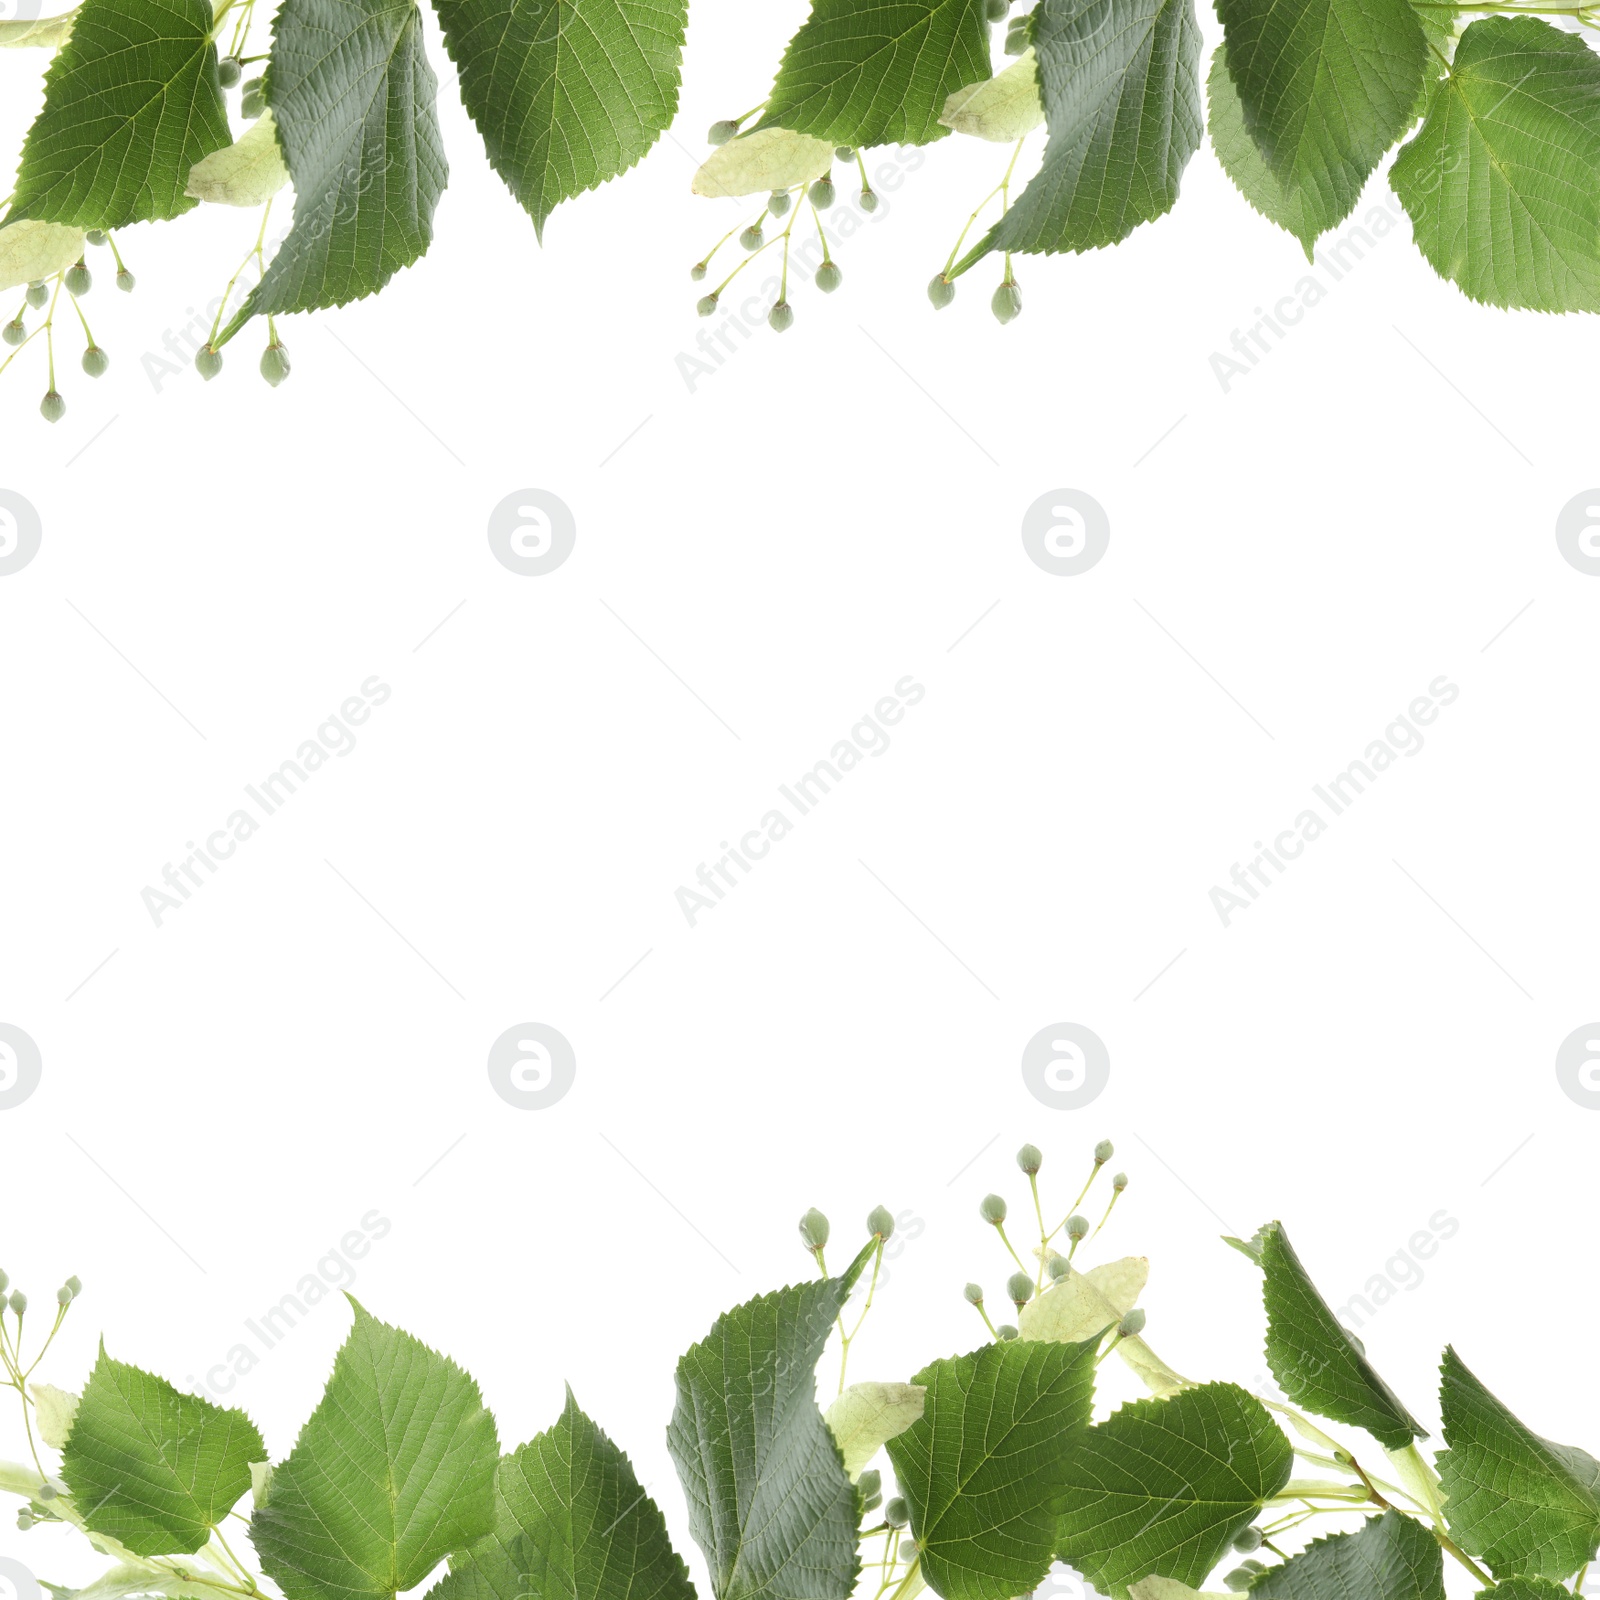 Image of Frame of linden branches with green leaves and bloom isolated on white